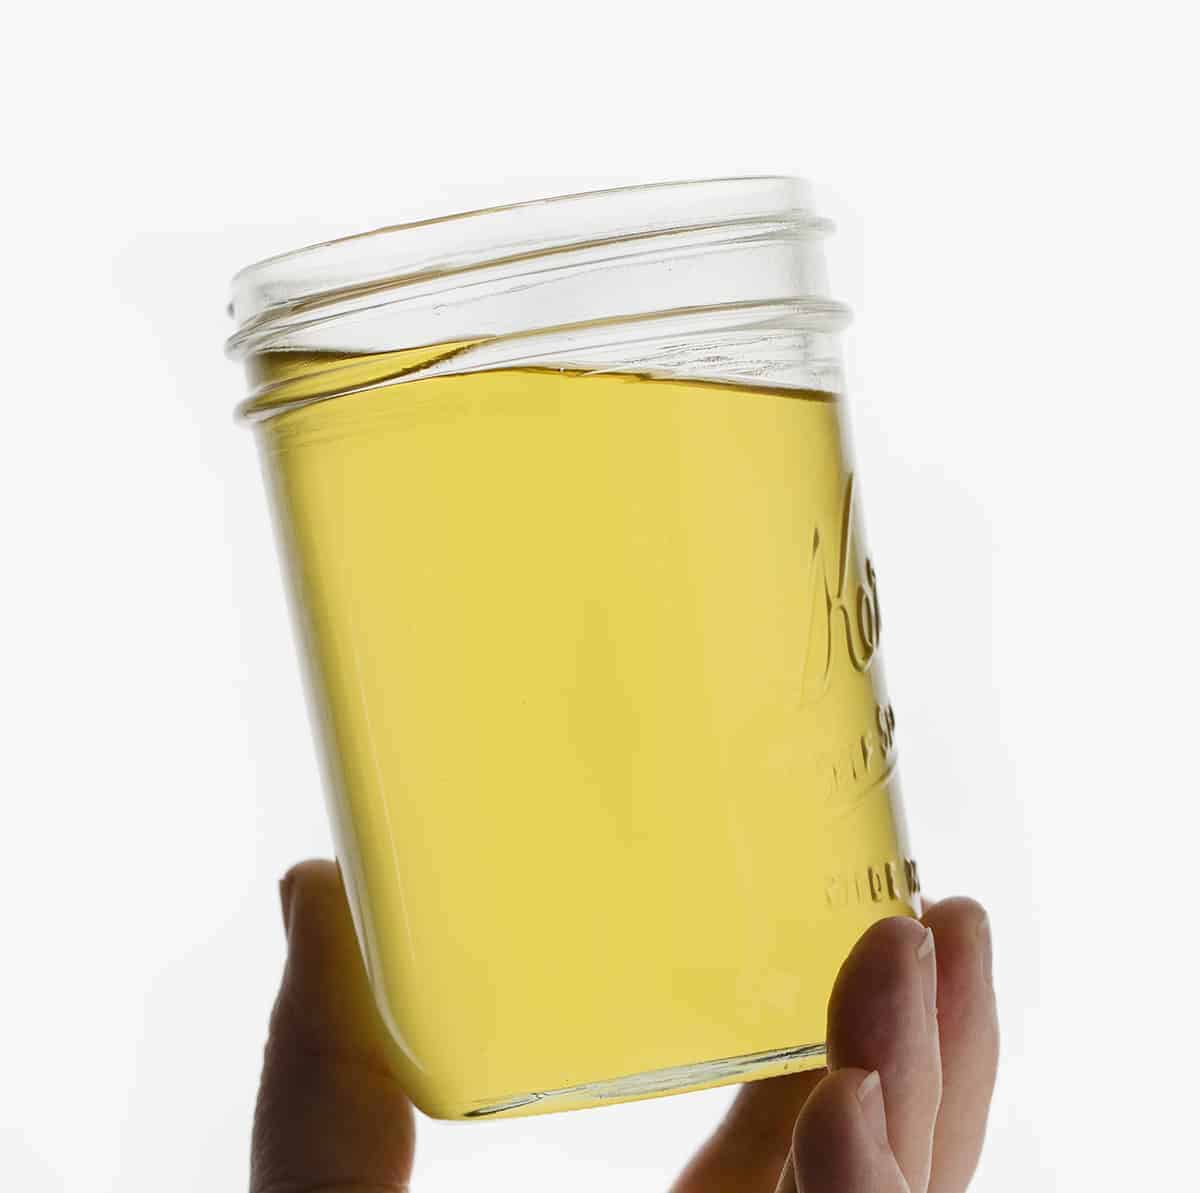 Hand Holding a Jar of Clarified Oil - How to Clean Used Cooking Oil.